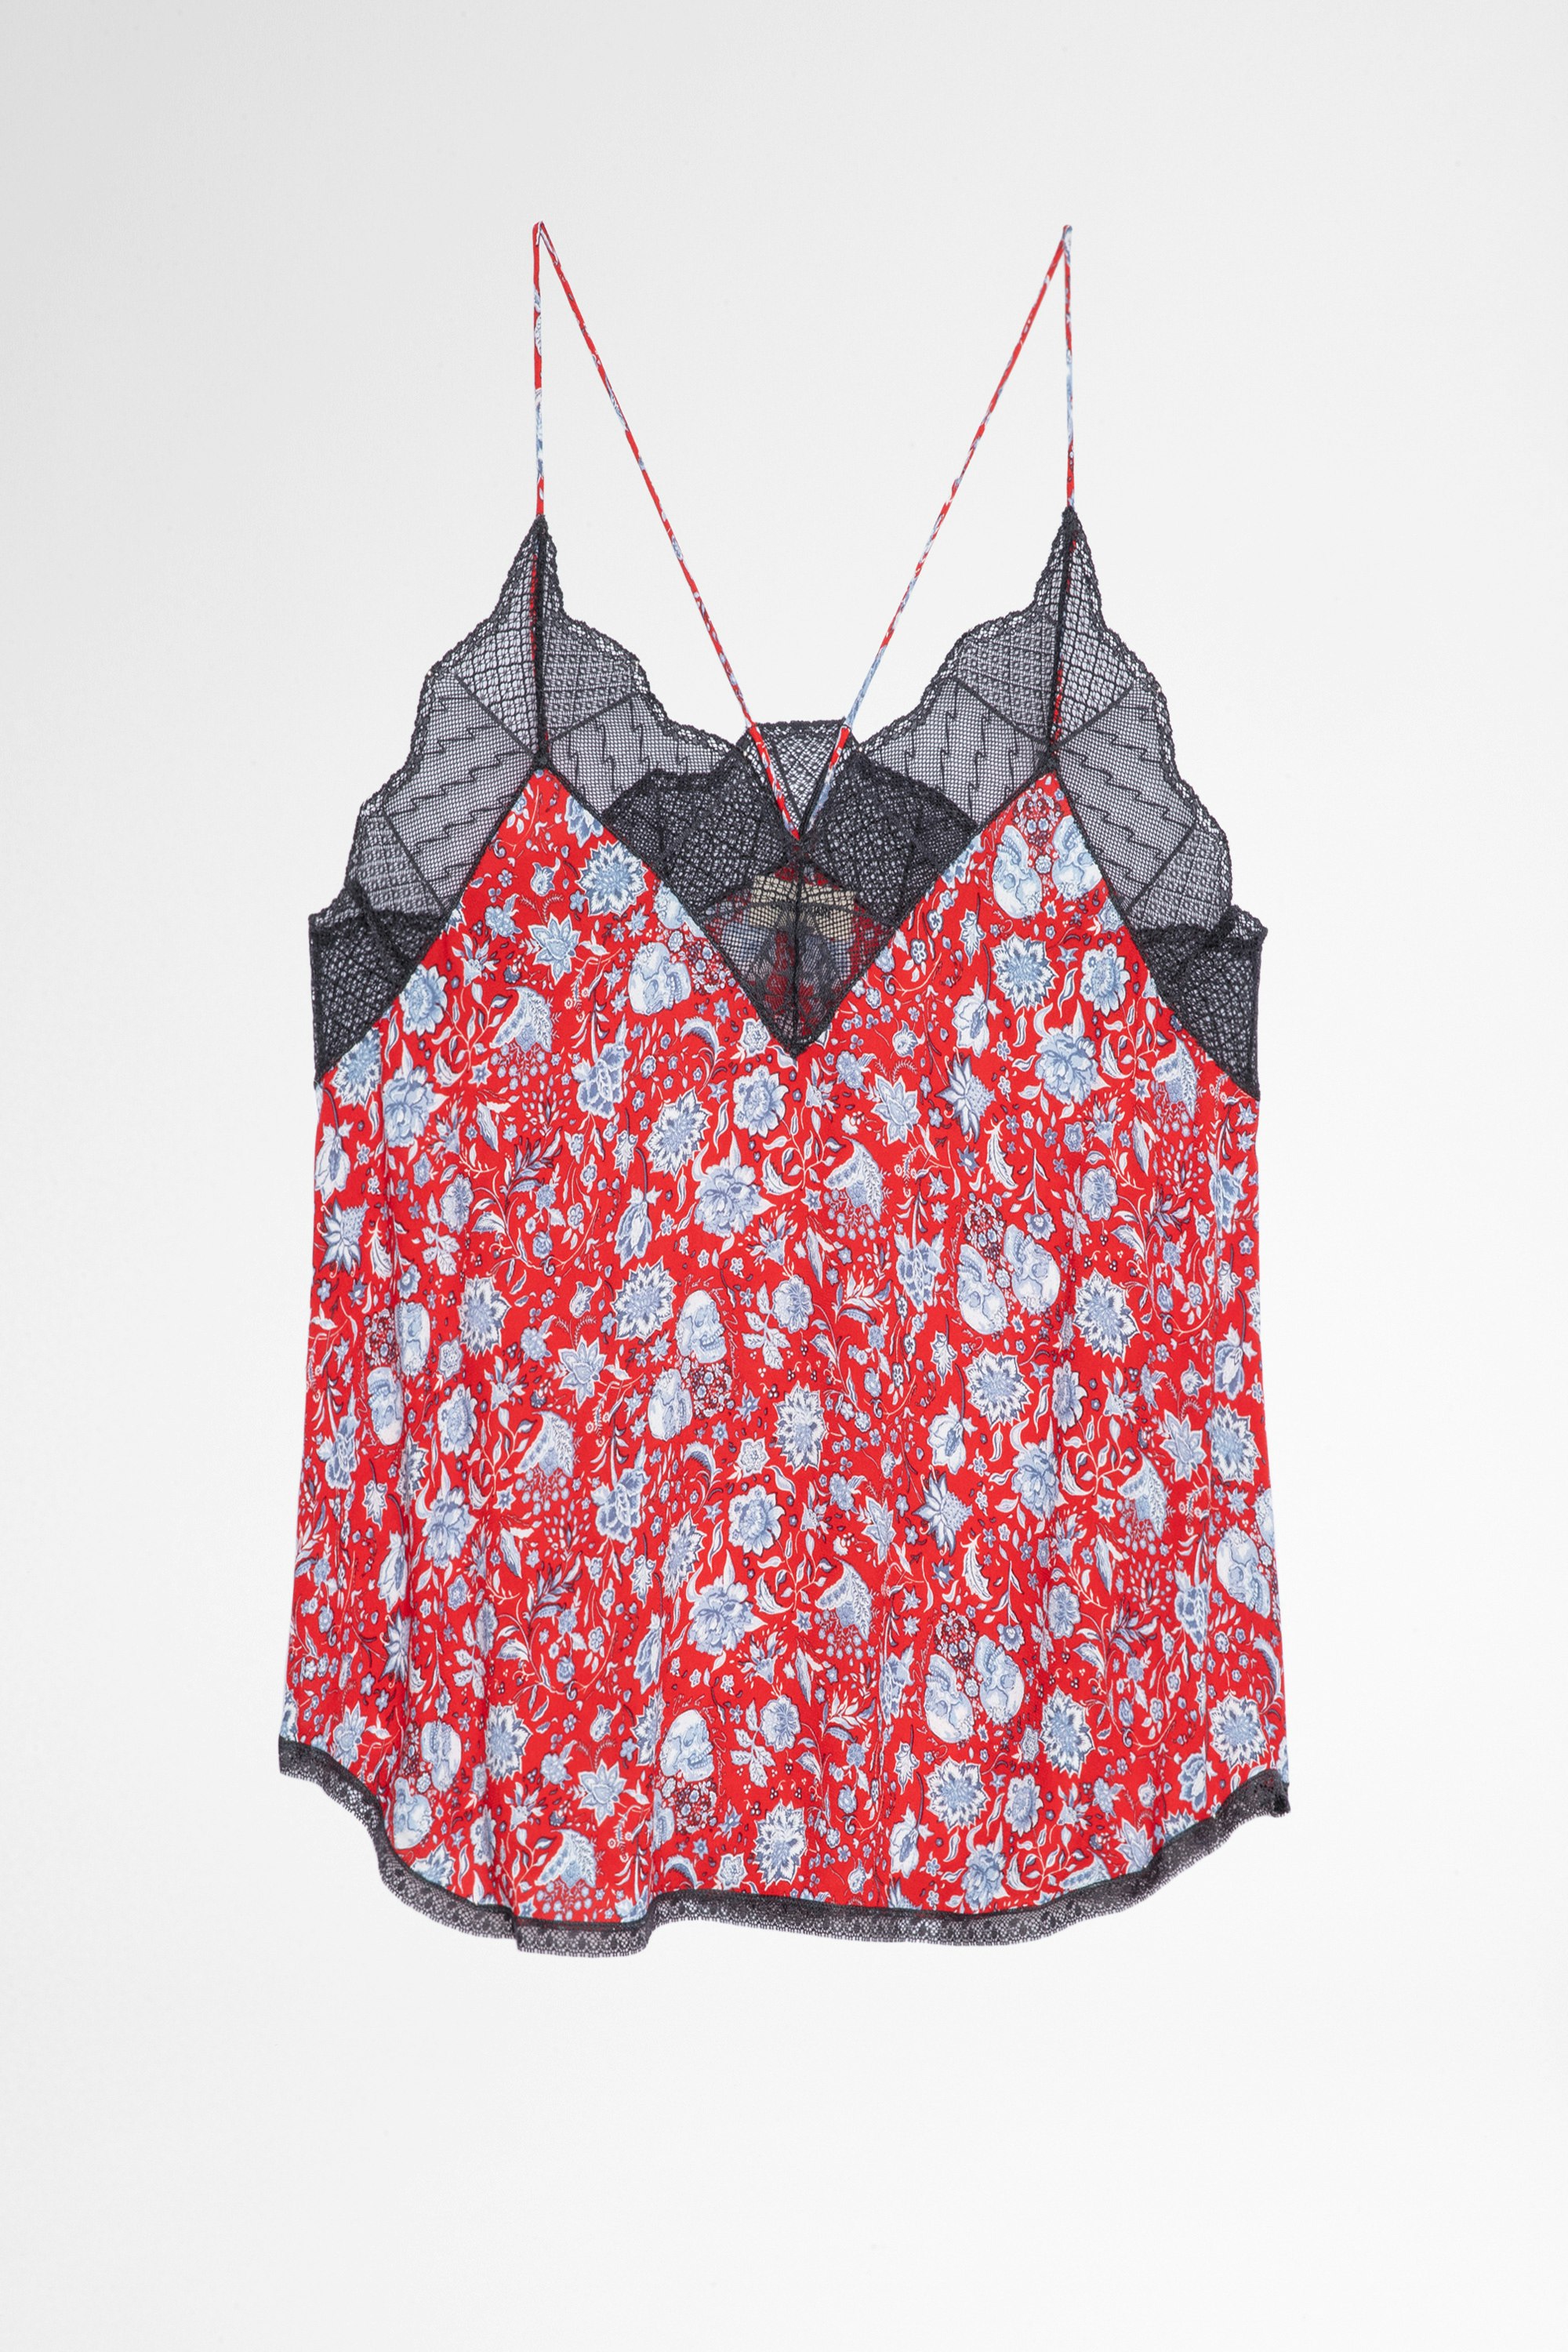 Christy キャミソール Women's floral print camisole in red with black lace trim